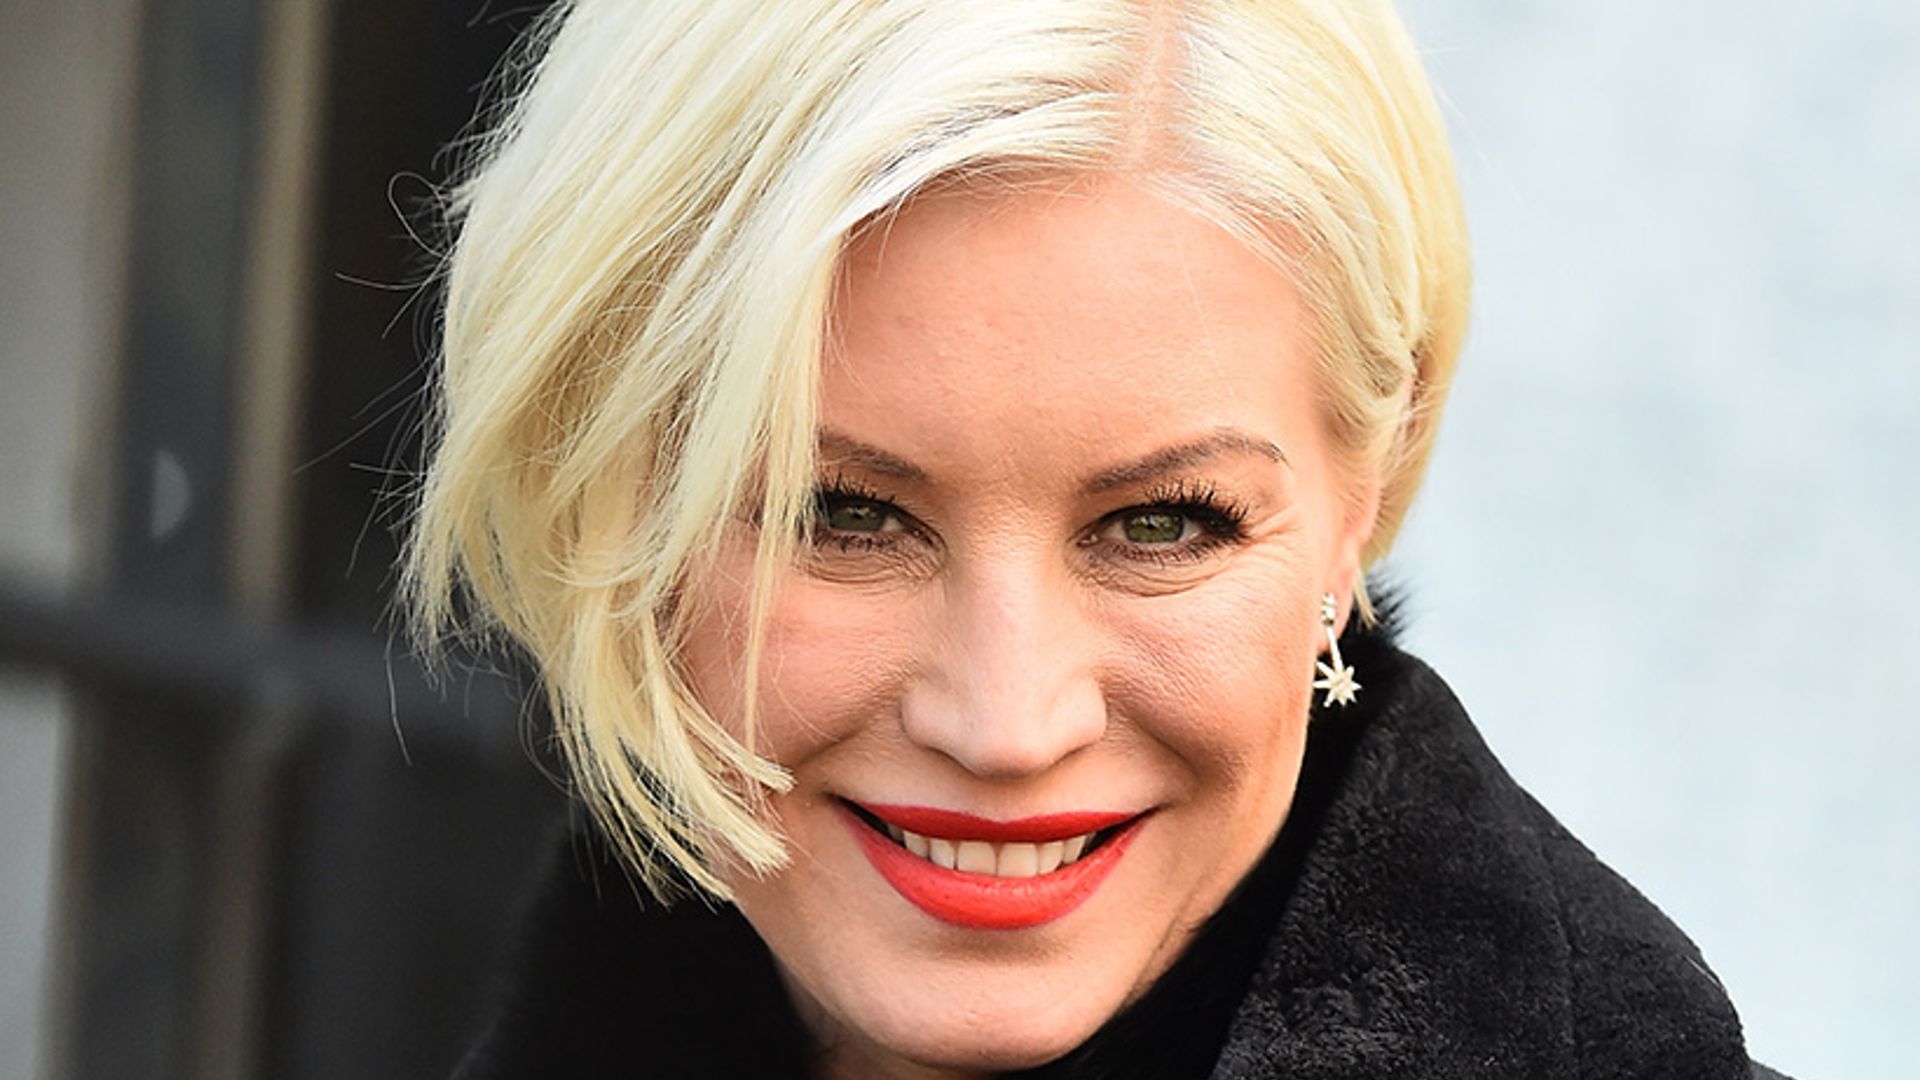 Denise Van Outen shares photo of her super-long eyelashes – see the snap!